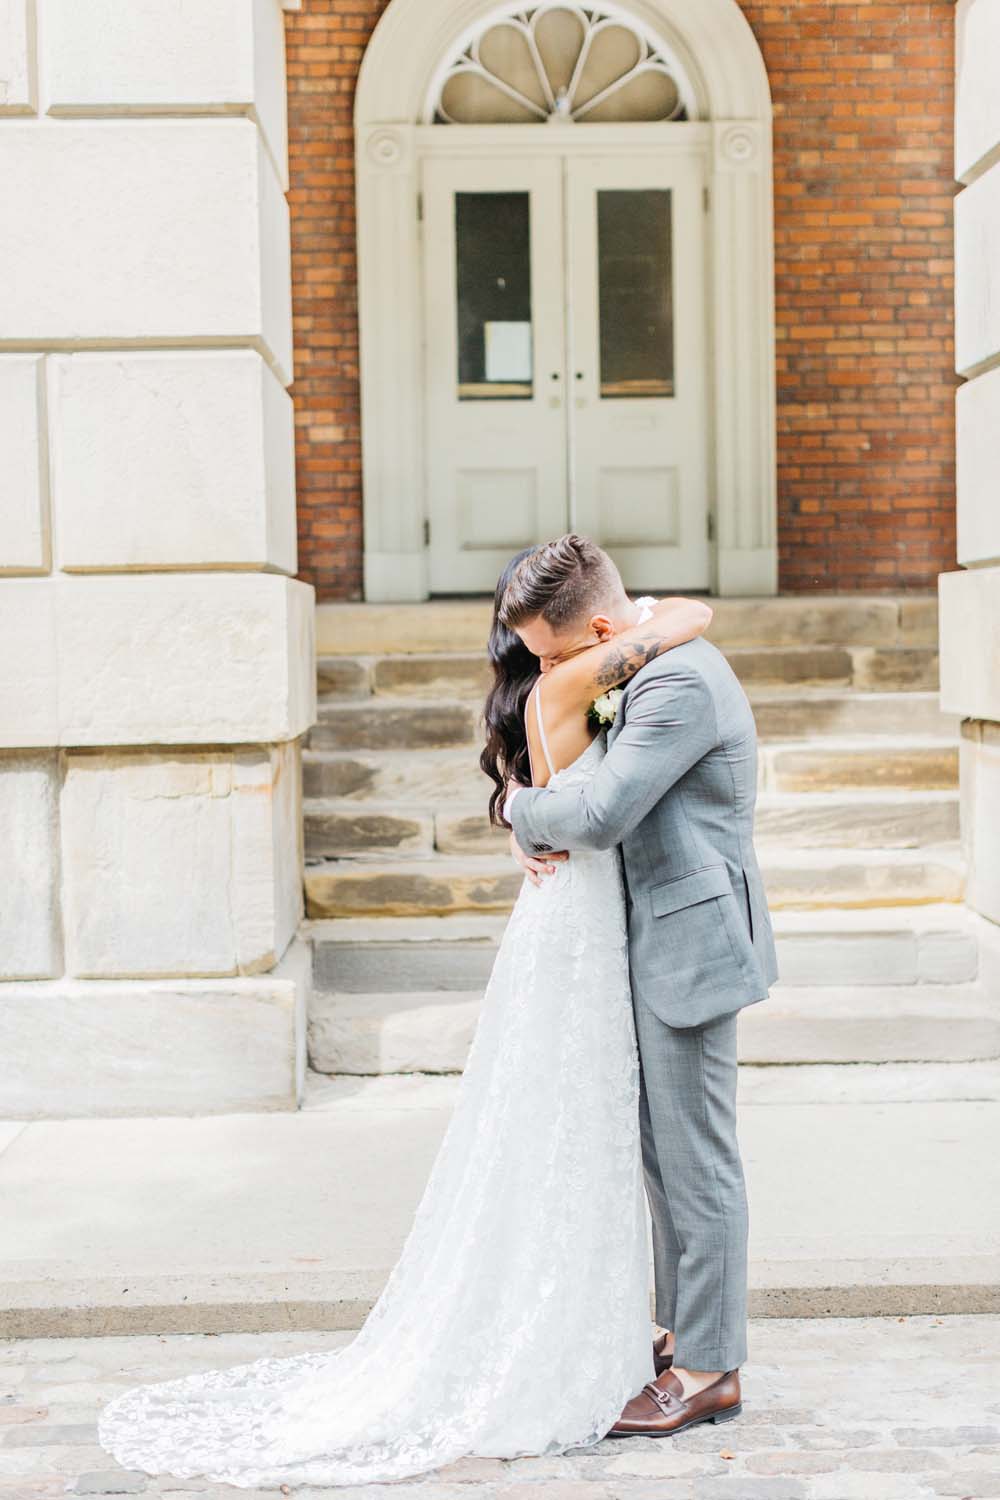 A Bright and Airy September Wedding in Toronto, Ontario - First Look